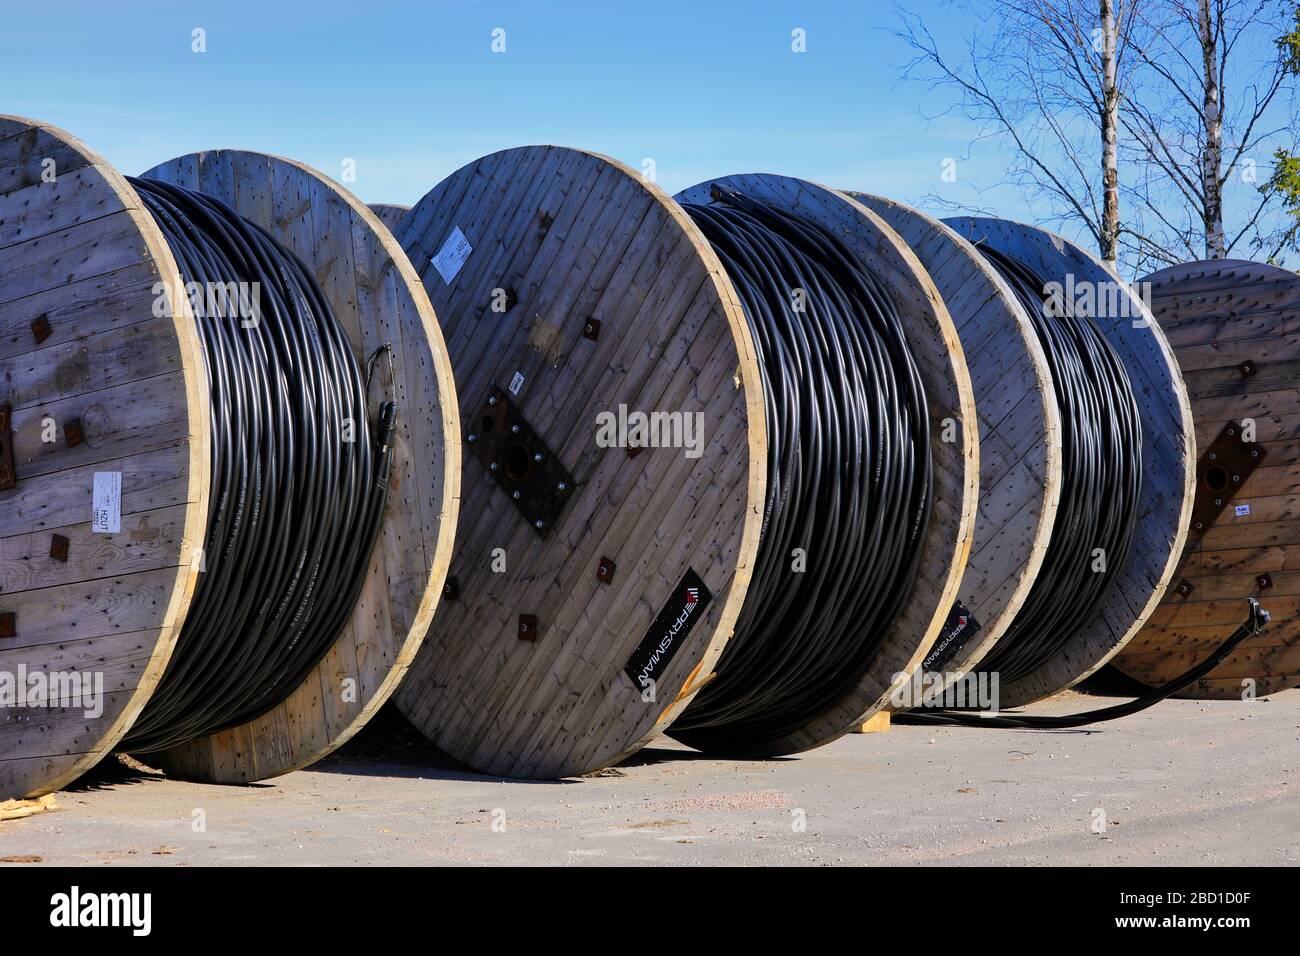 Prysmian Group Wiski Plain cable reels for ground installations at rural work site with blue sky background. Marttila, Finland. April 6, 2019. Stock Photo